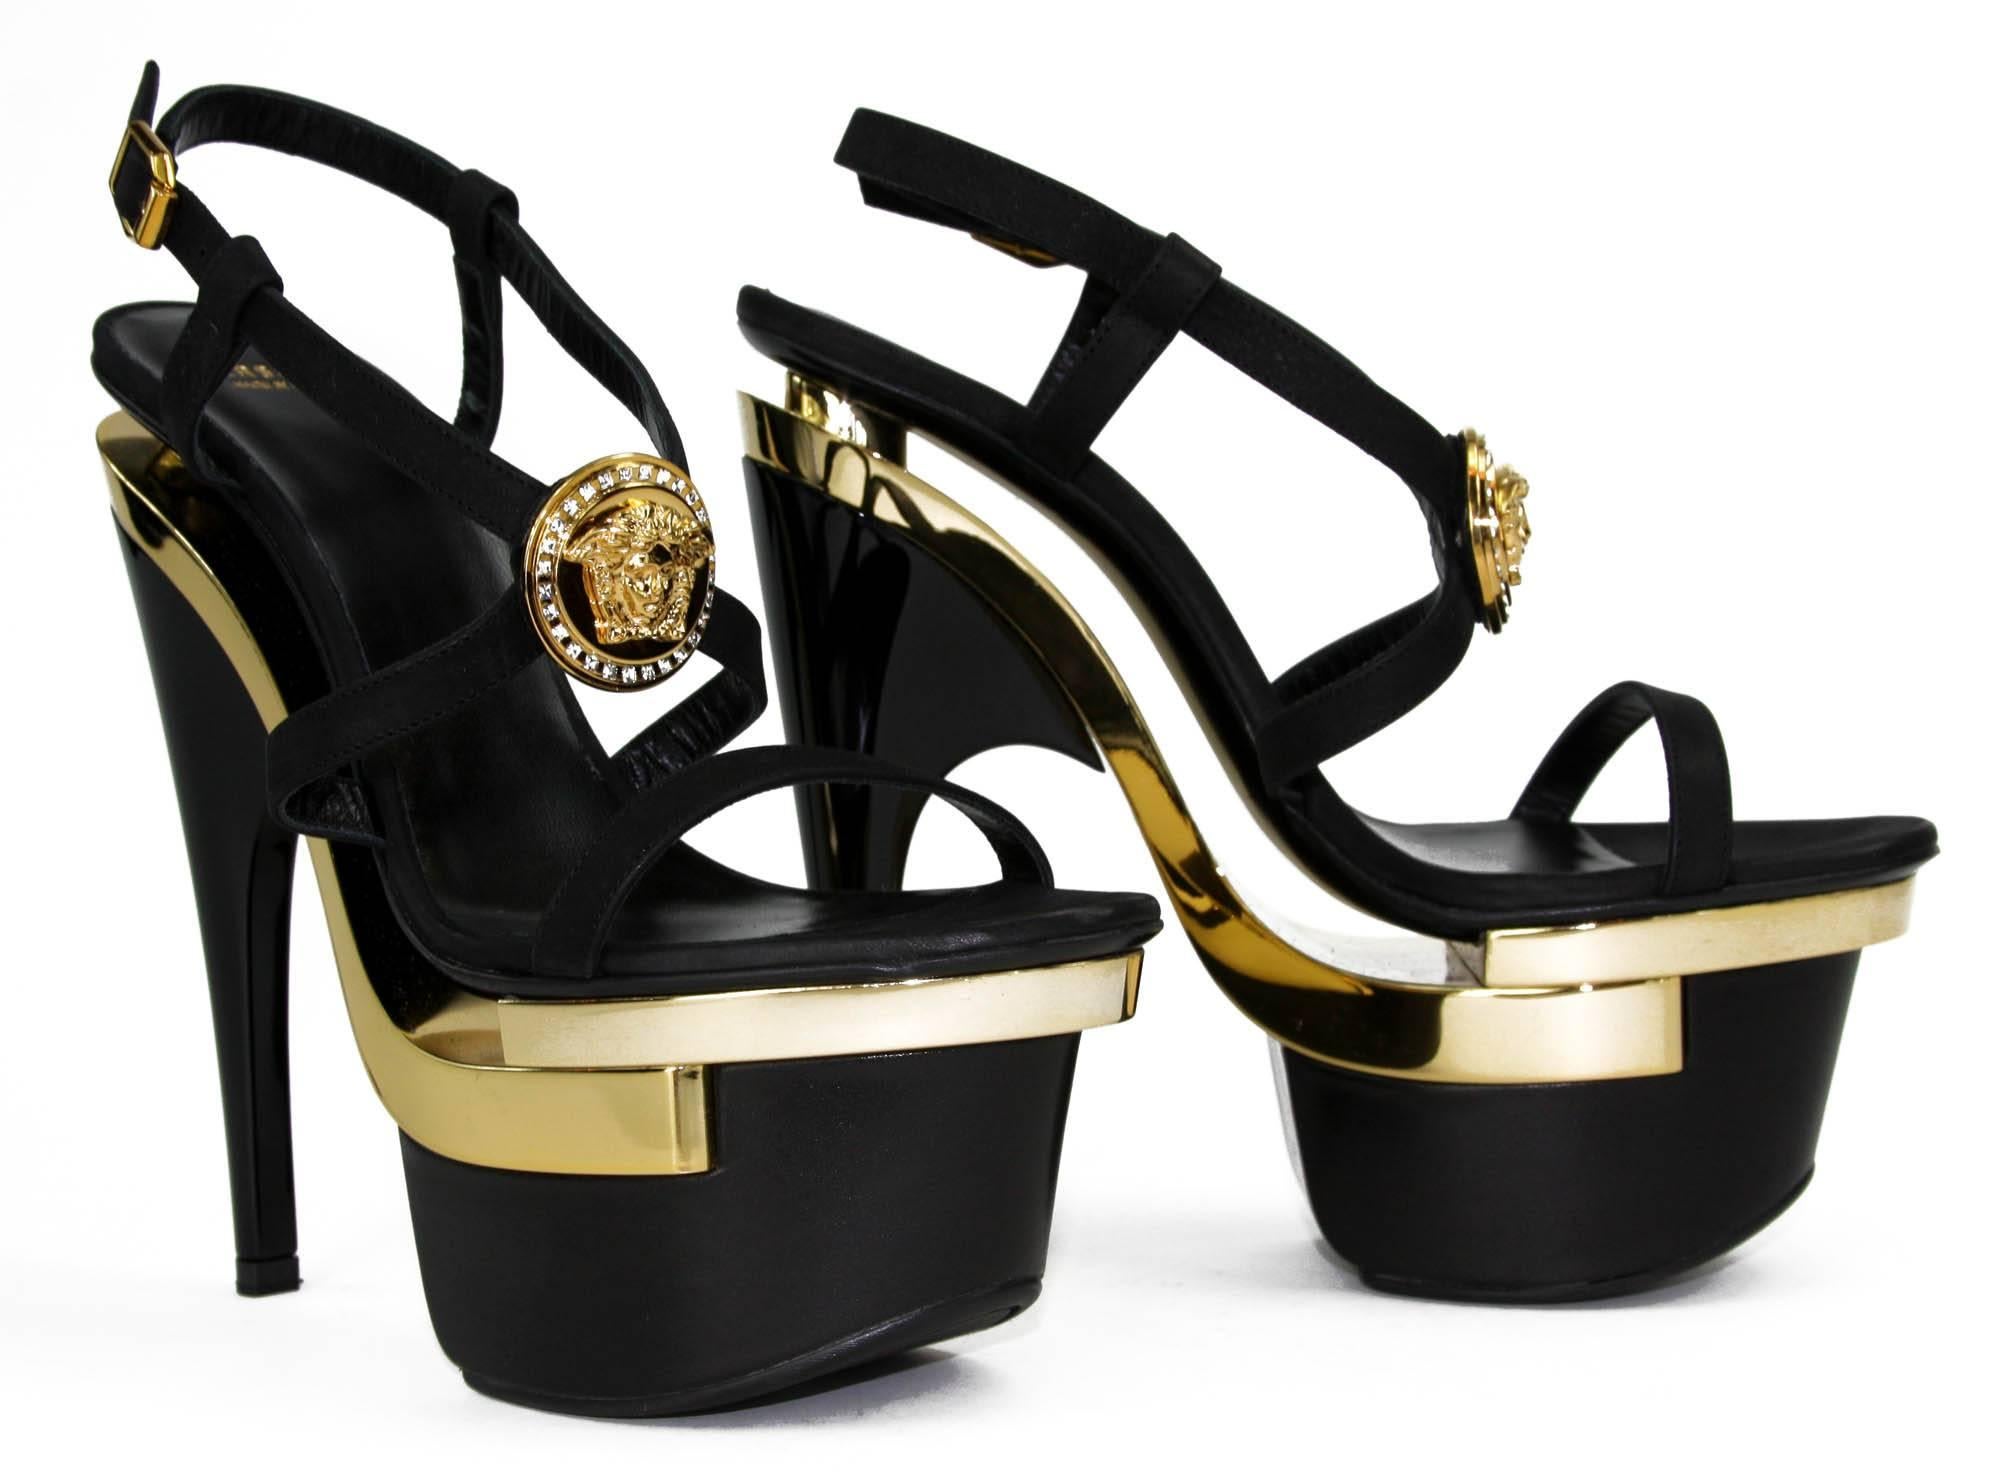 New Versace Triple Platform Strap Sandals
Sizes Available - 35.5, 37, 37.5, 38, 38.5, 39, 39.5, 40, 40.5, 41.
Colors - Gold and Black
100% Leather
Swarovski Crystals Gold Medusa 
Leather Lining 
Leather Sole
Heel Height - 6.5